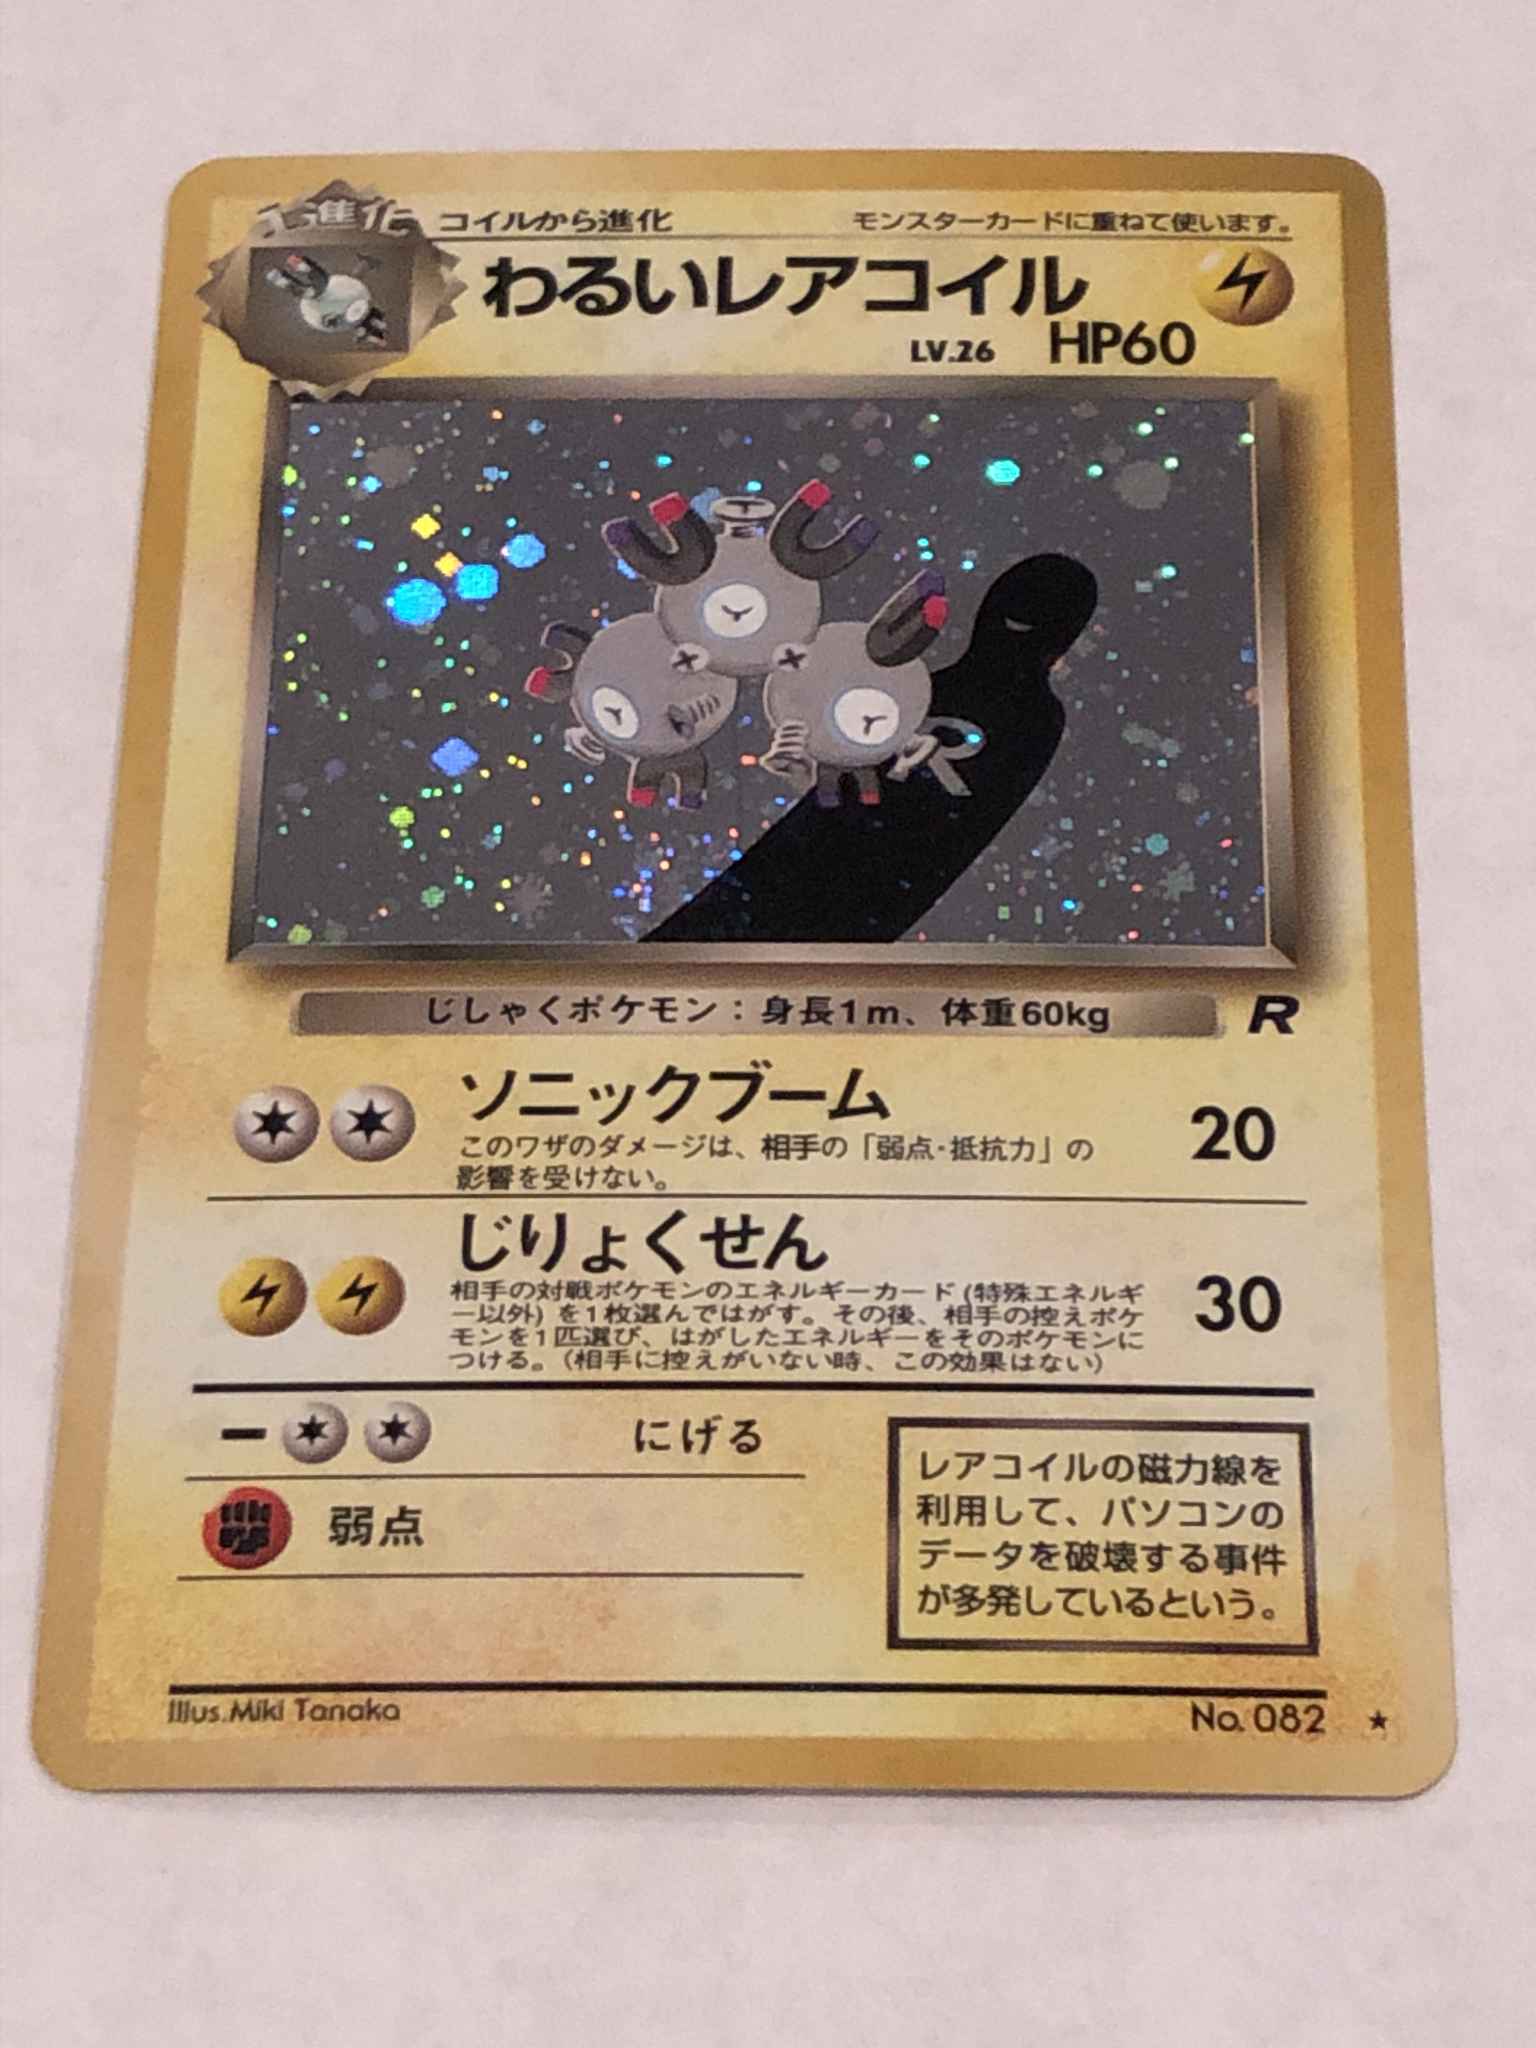 Japanese Dark Magneton 11 Holo Mint Condition Dark Magneton 11 Team Rocket Pokemon Online Gaming Store For Cards Miniatures Singles Packs Booster Boxes